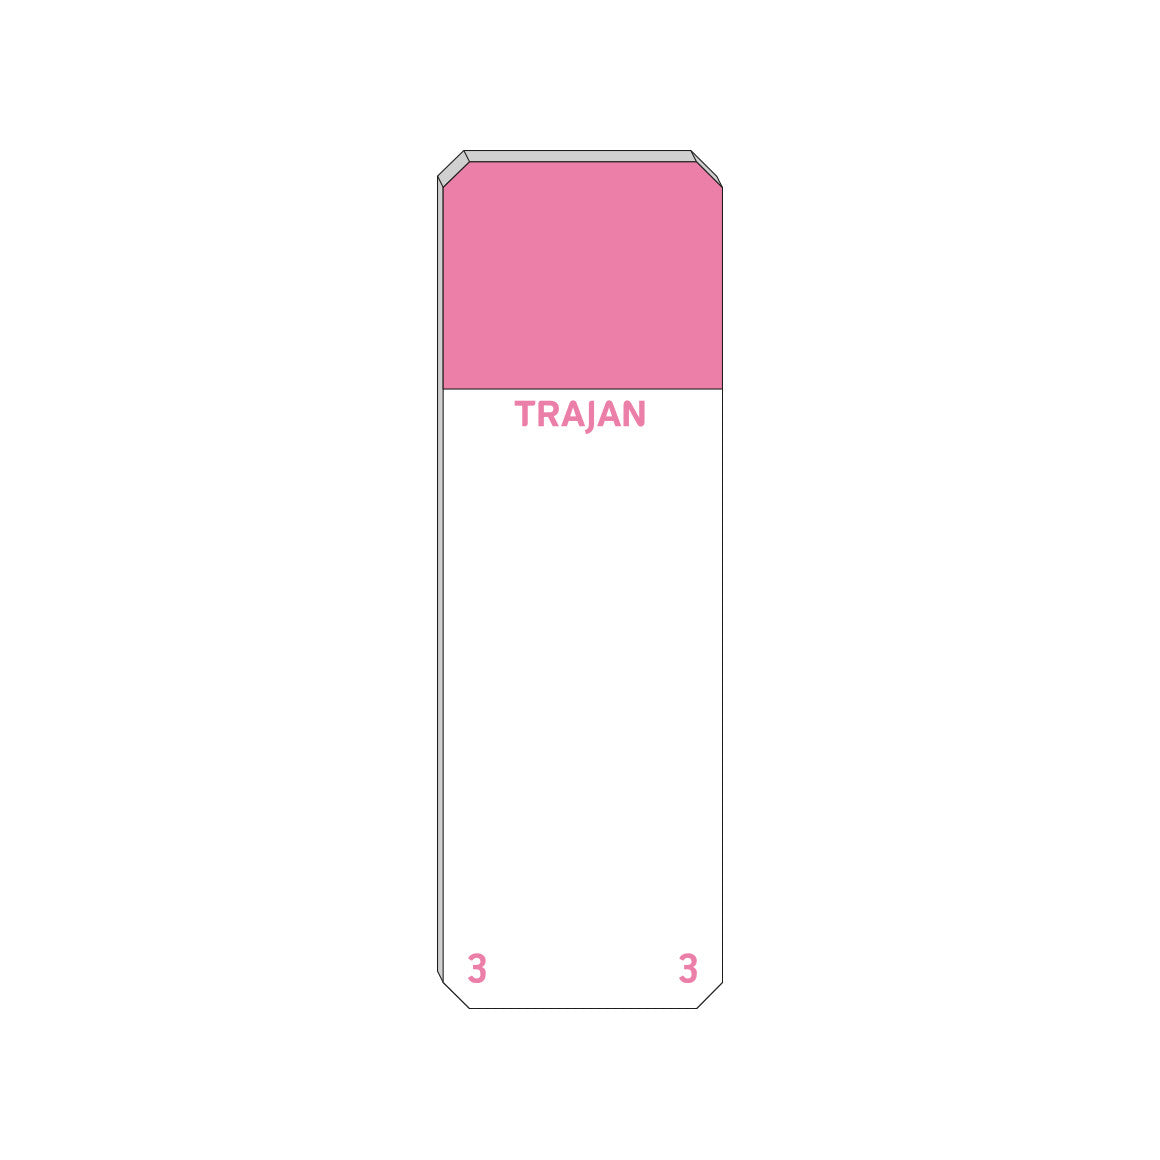 Trajan Scientific and Medical, Series 3 Adhesive Microscope Slides, Pink, Frost 20 mm, 75 mm x 25 mm